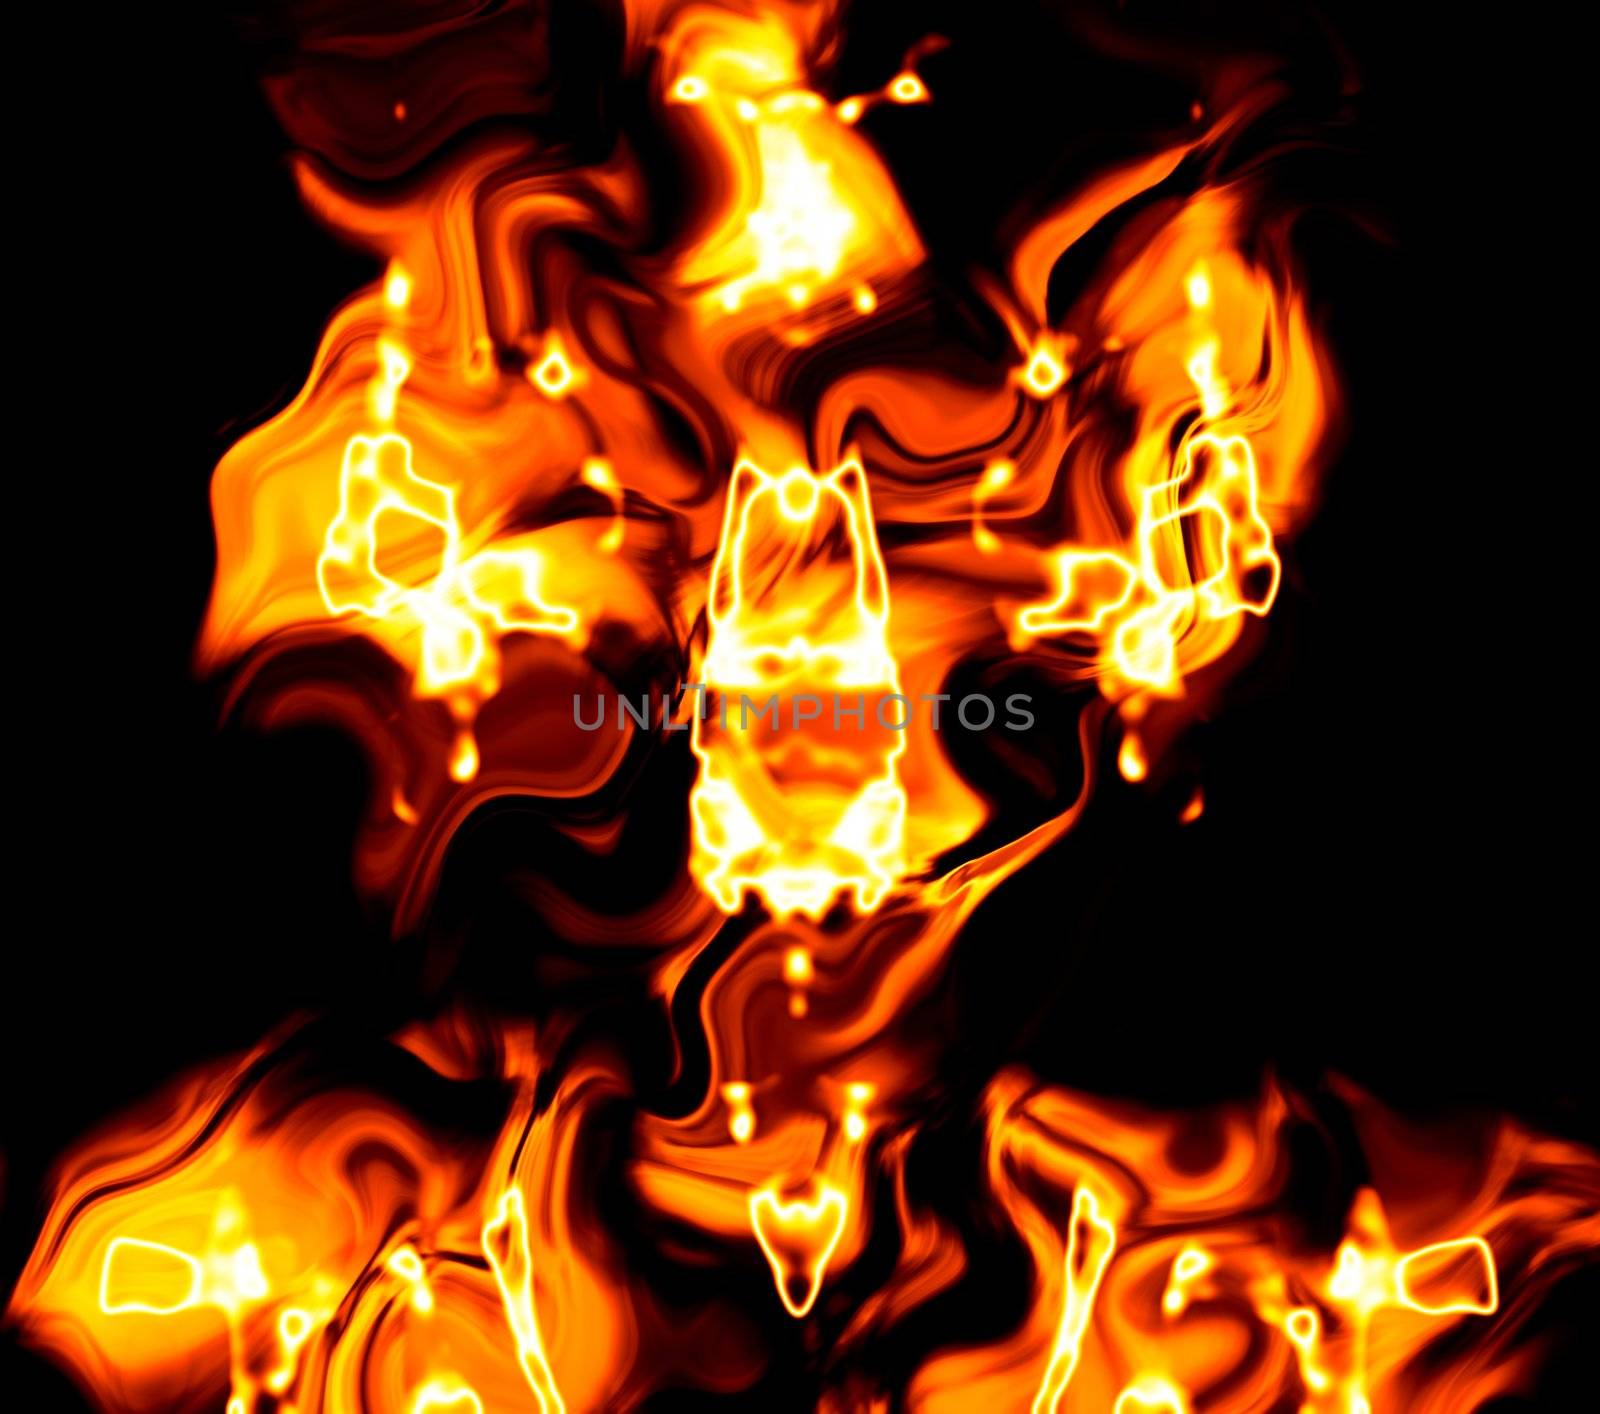 Abstract fiery background illustration with hot flames.